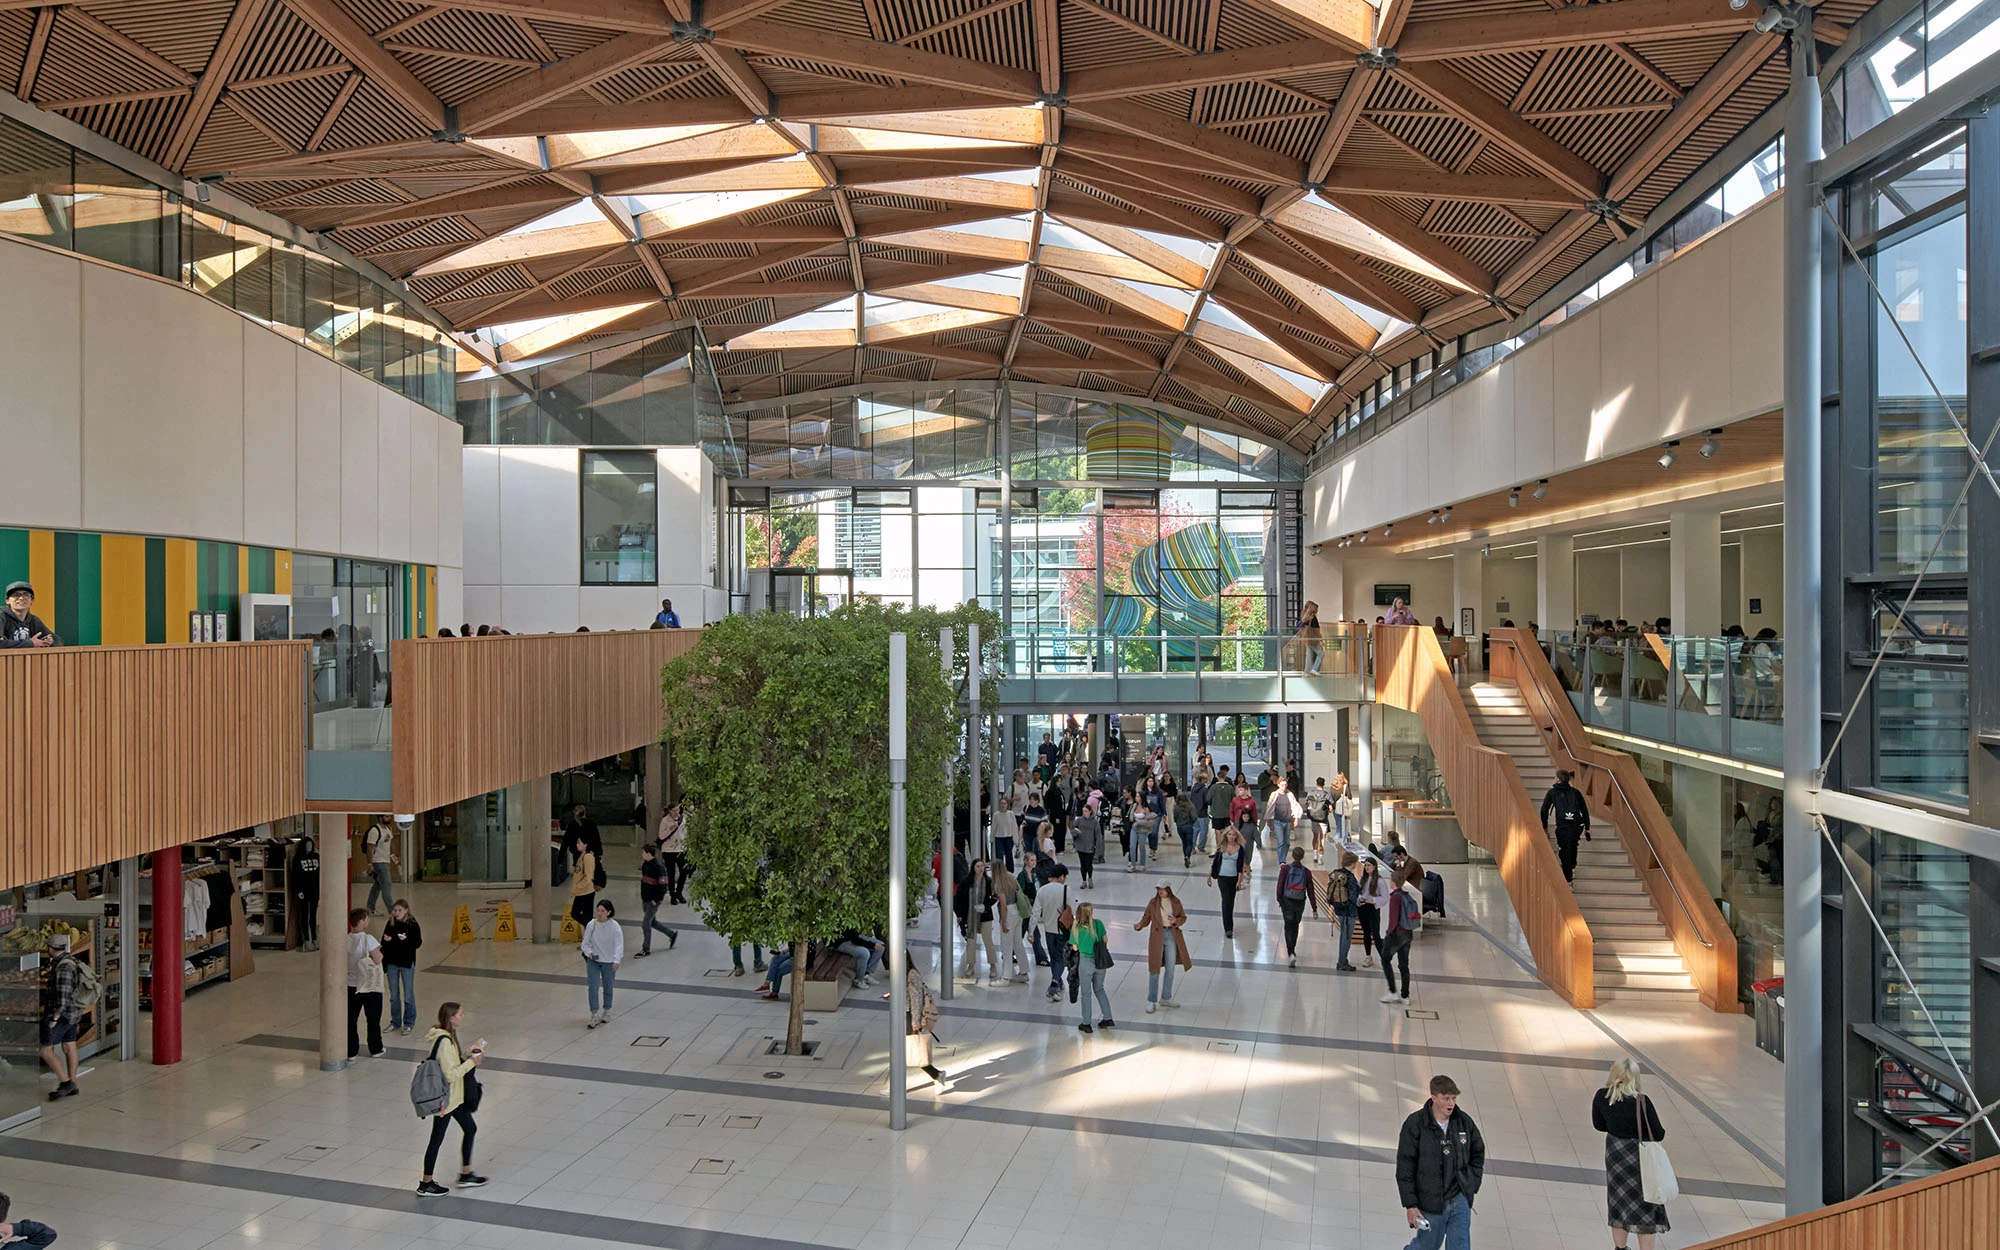 Interior of the Forum at the Exeter University